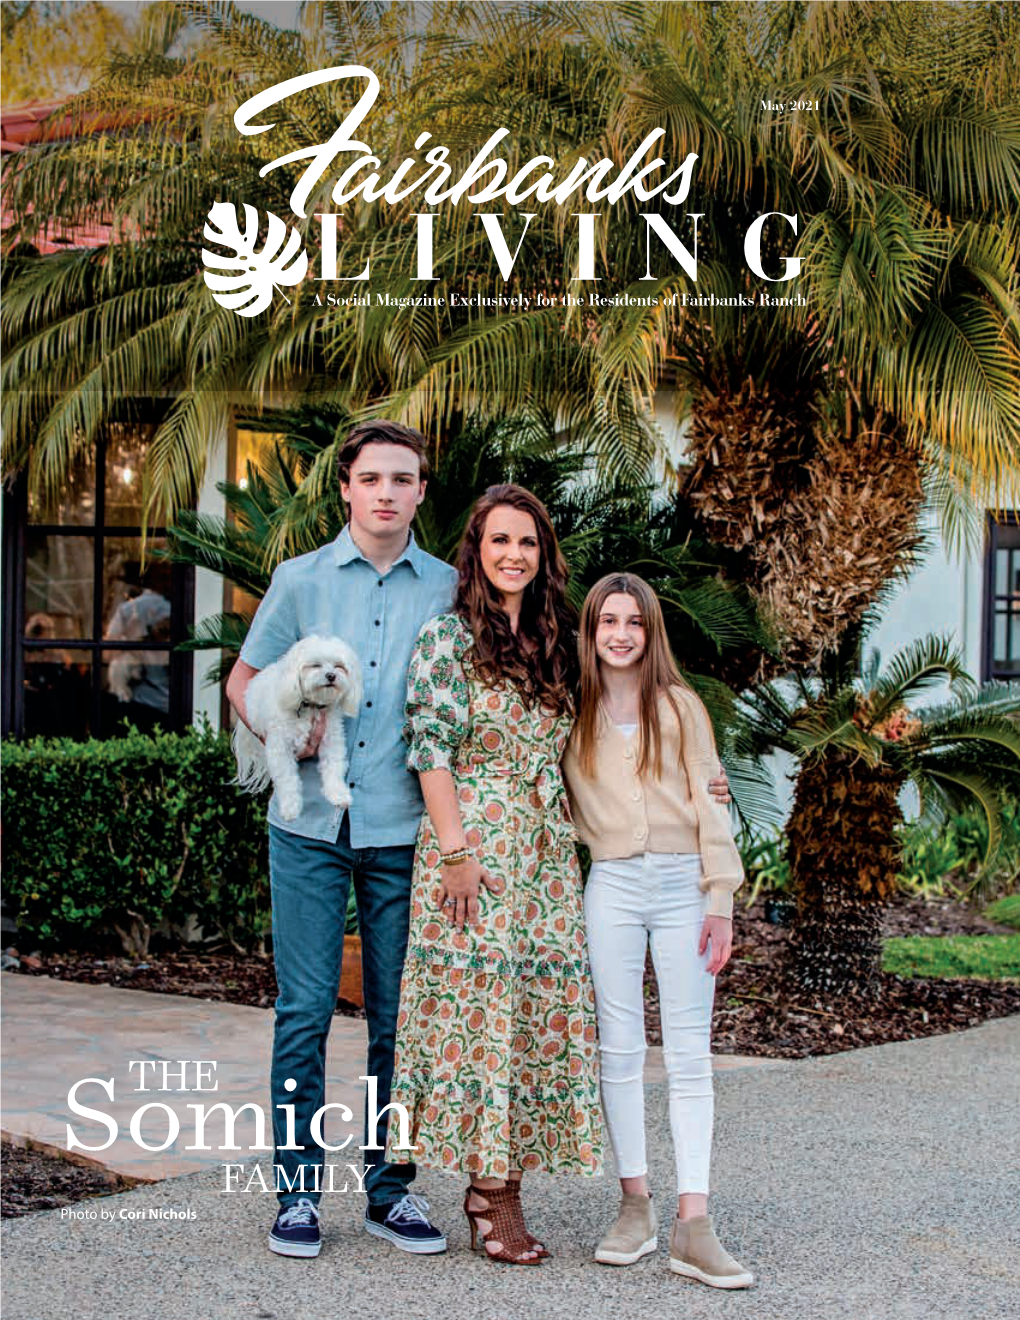 LIVING a Social Magazine Exclusively for the Residents of Fairbanks Ranch